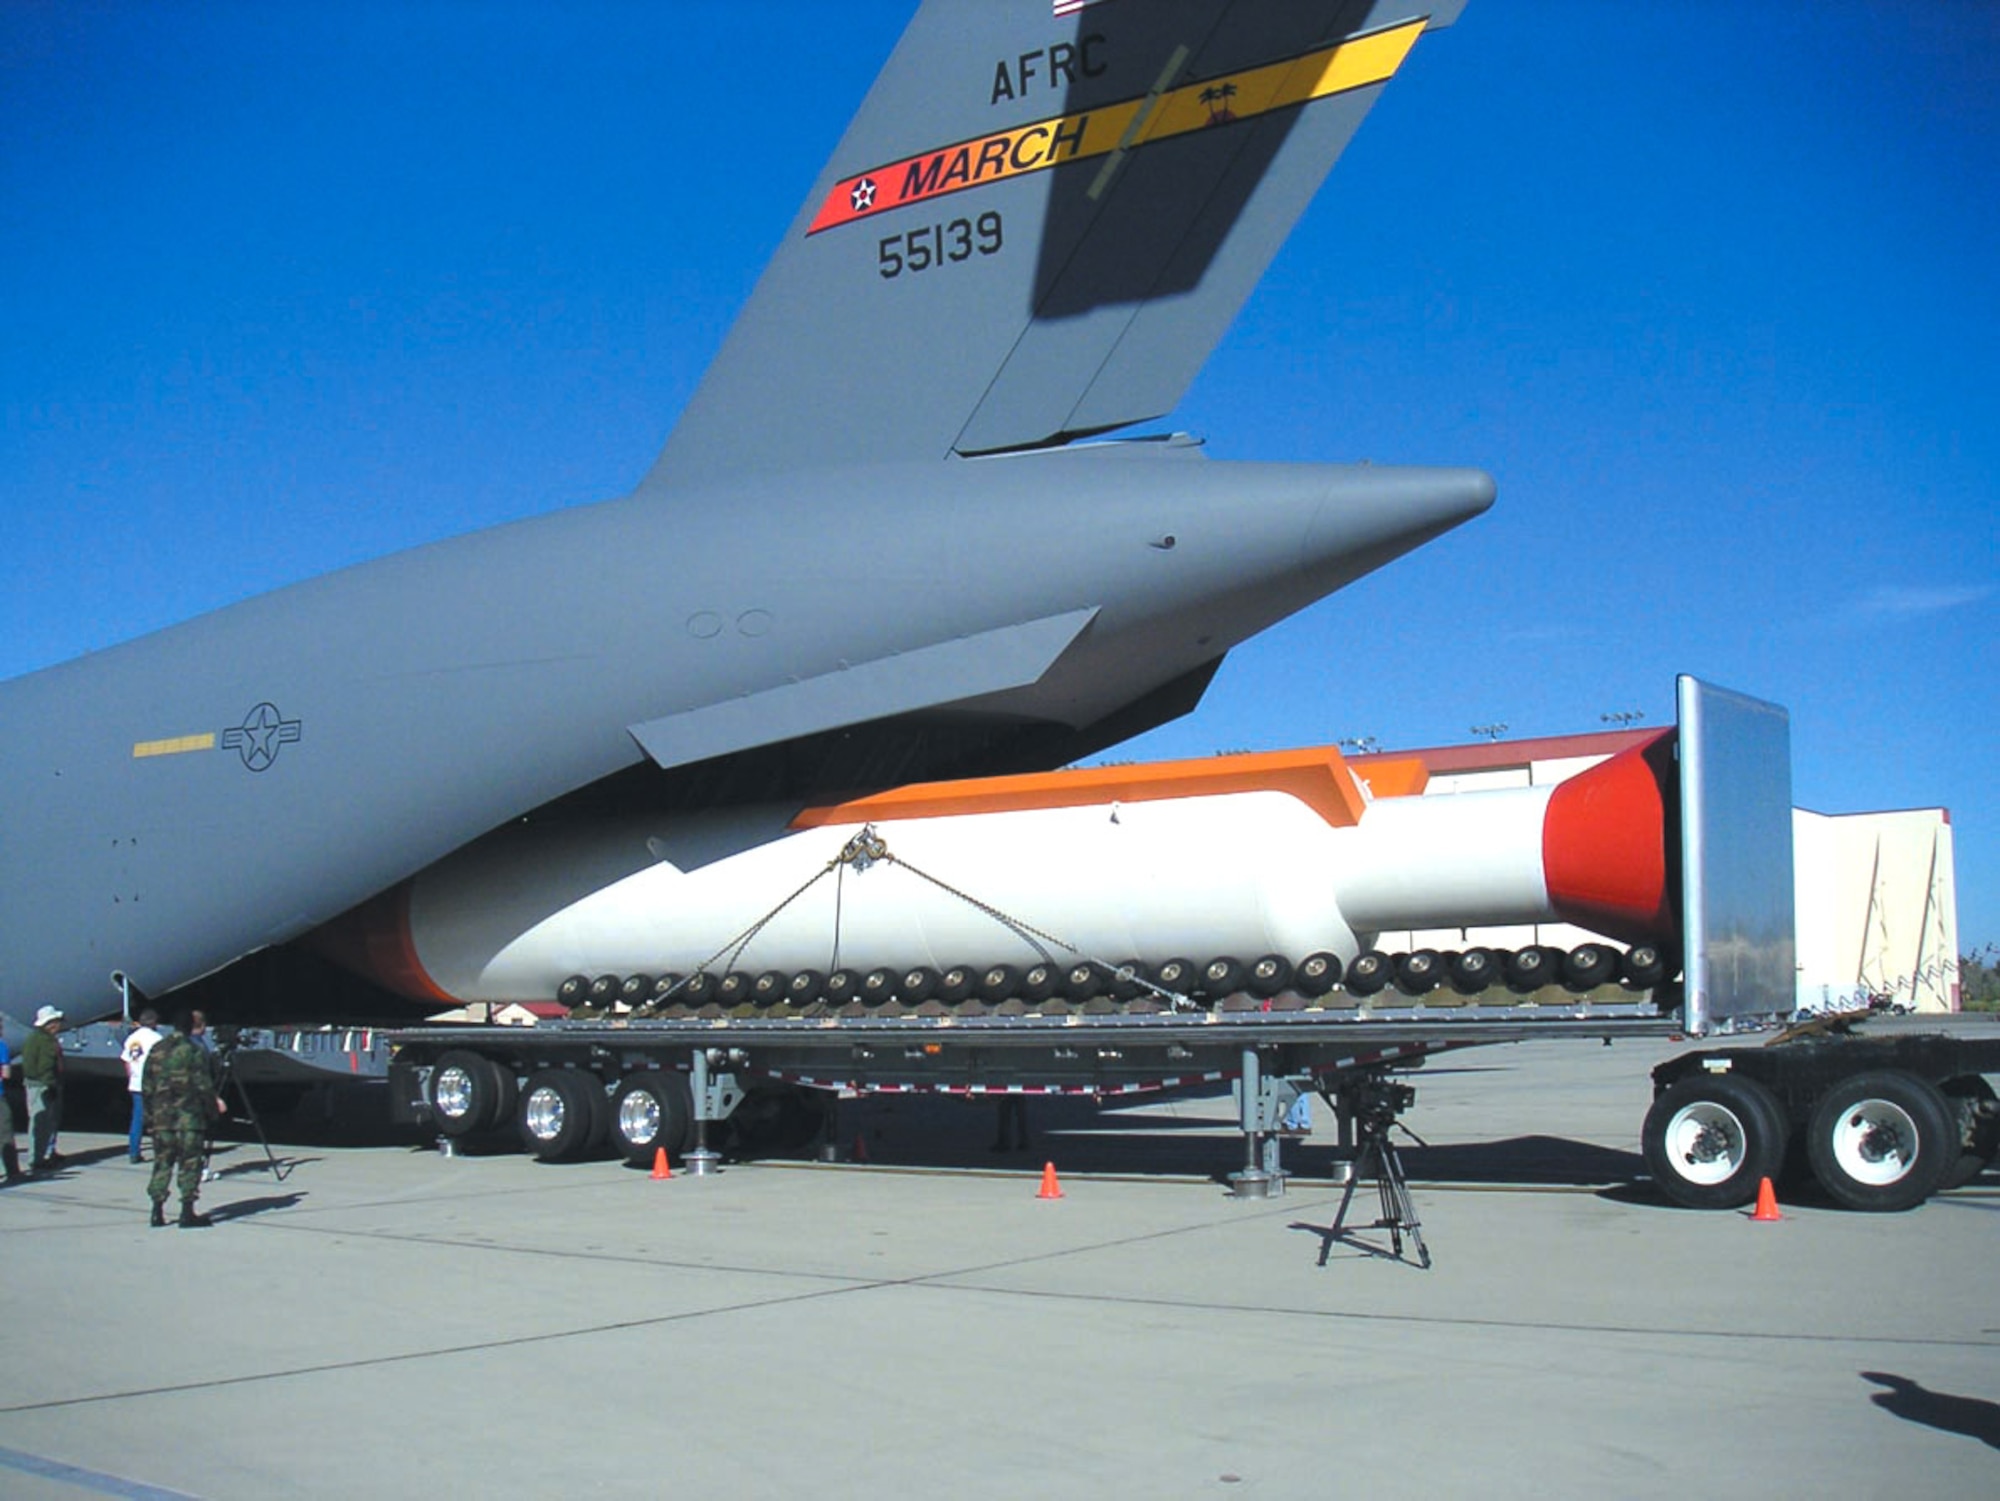 EDWARDS AIR FORCE BASE, Calif. -- Test crews load, a 65-foot mock-up booster rocket onto a C-17 Globemaster III. The rocket will be used to test aerial launch capabilities for rockets. (U.S. Air Force photo by Brad White)